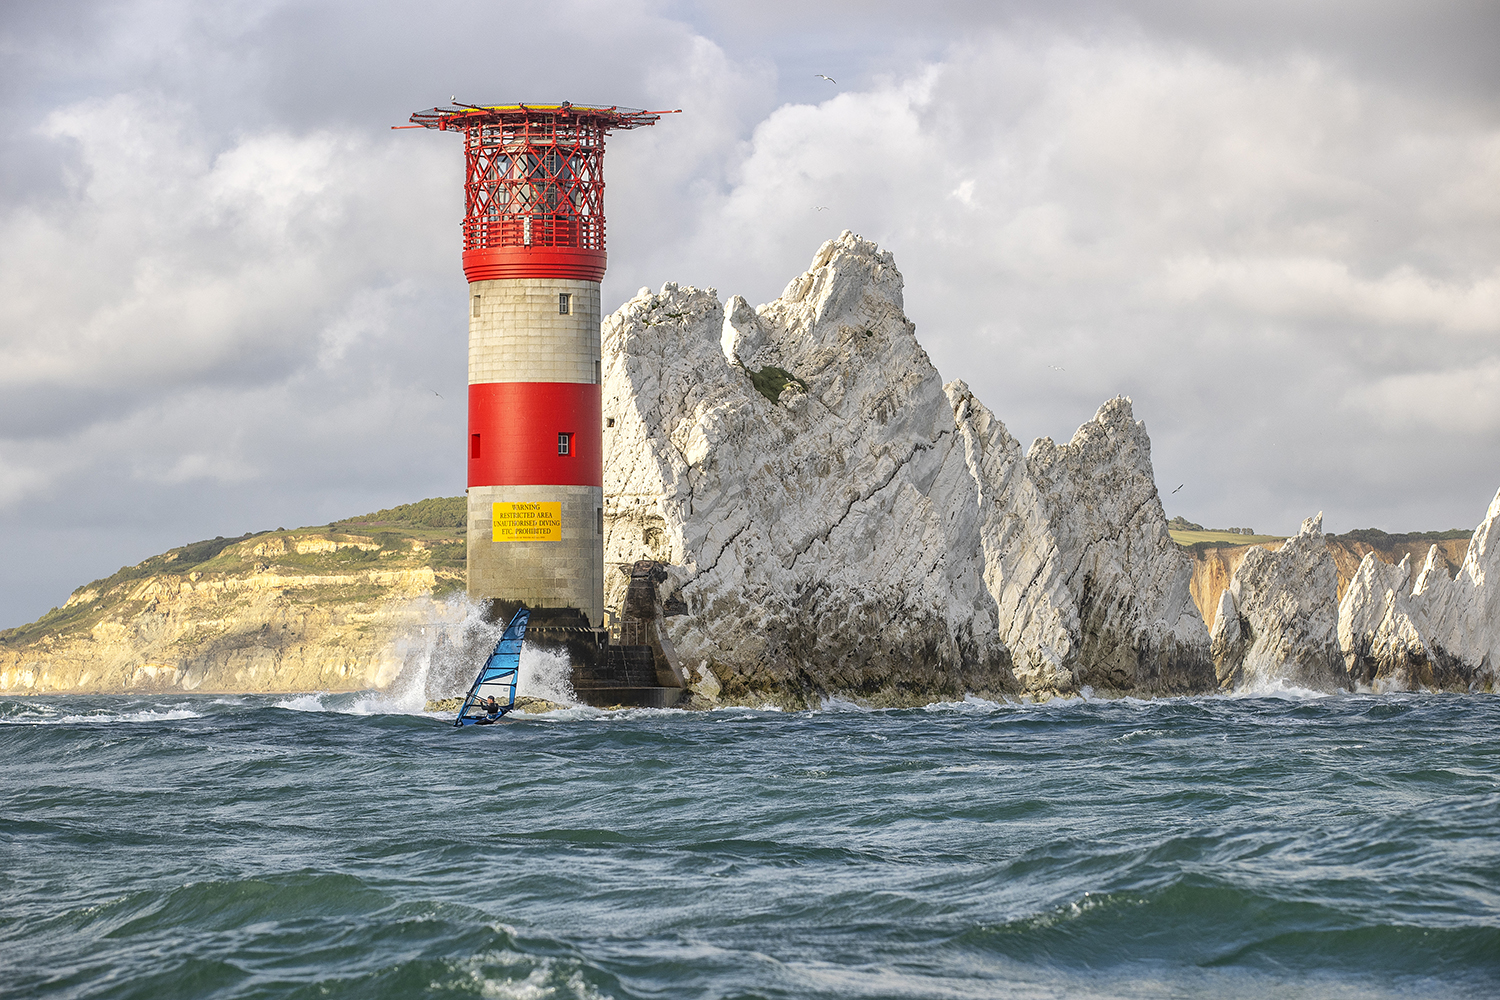 Action at the Needles!